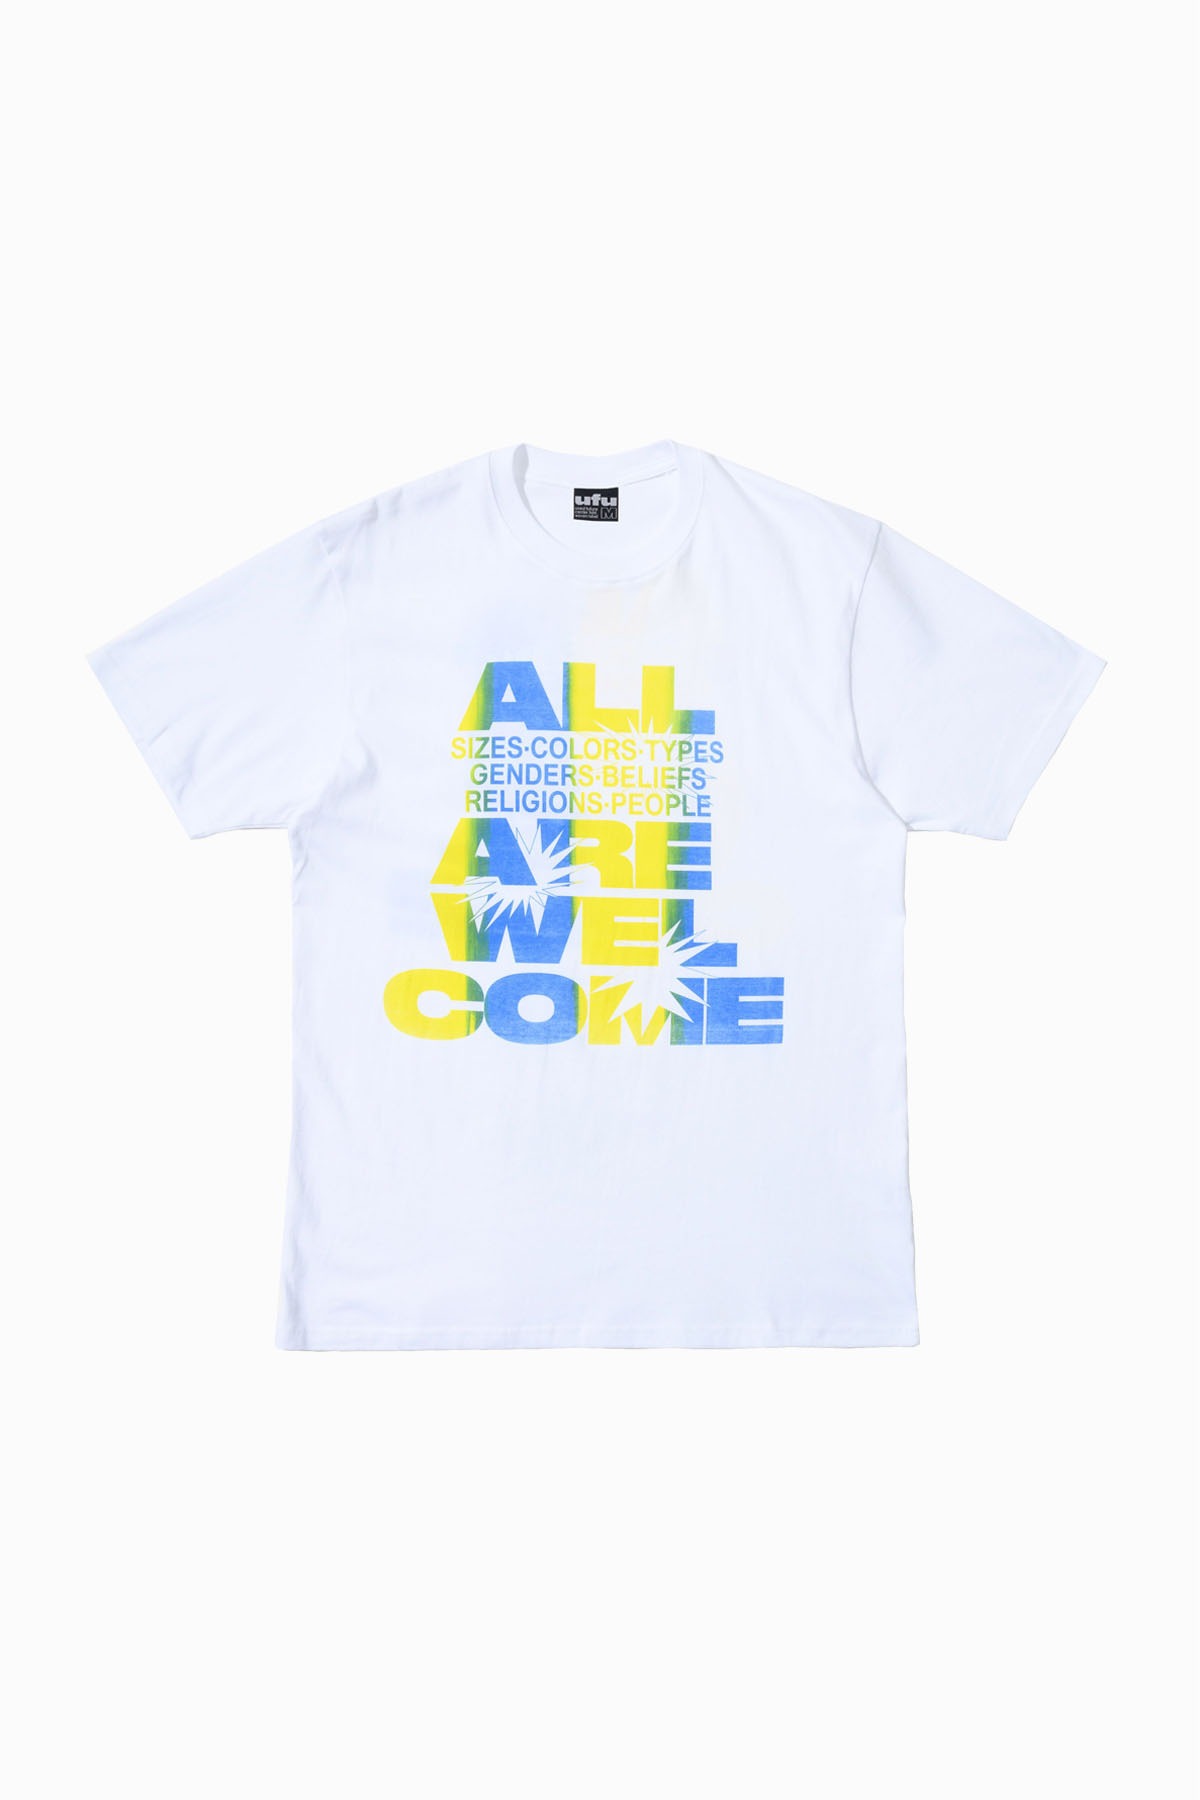 ALL ARE WELCOME T-SHIRT